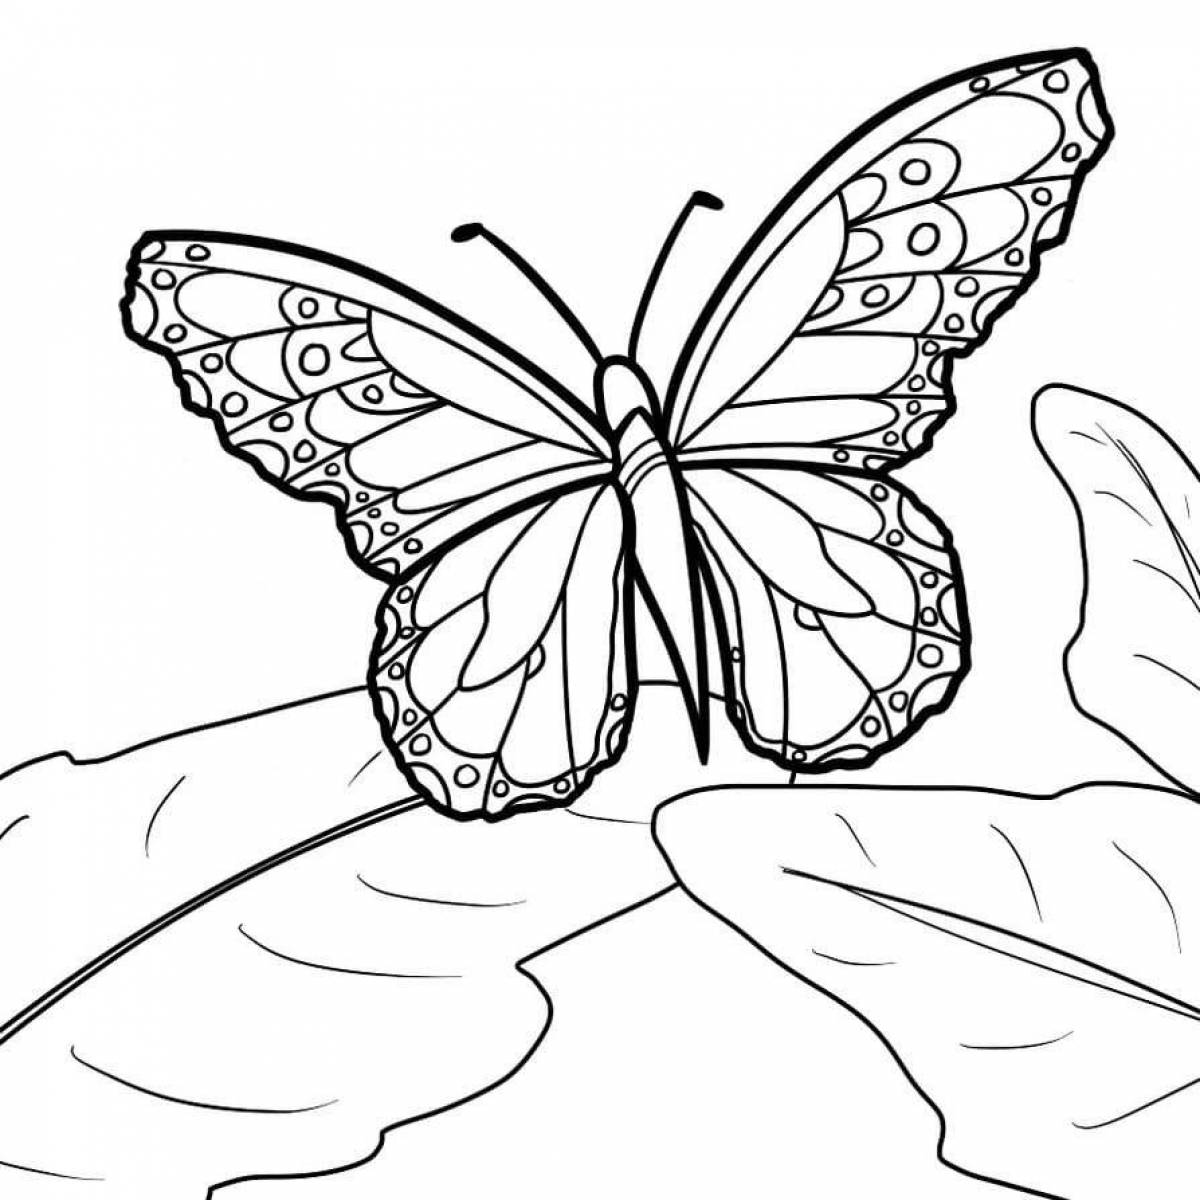 Majestic butterfly coloring book for children 6-7 years old